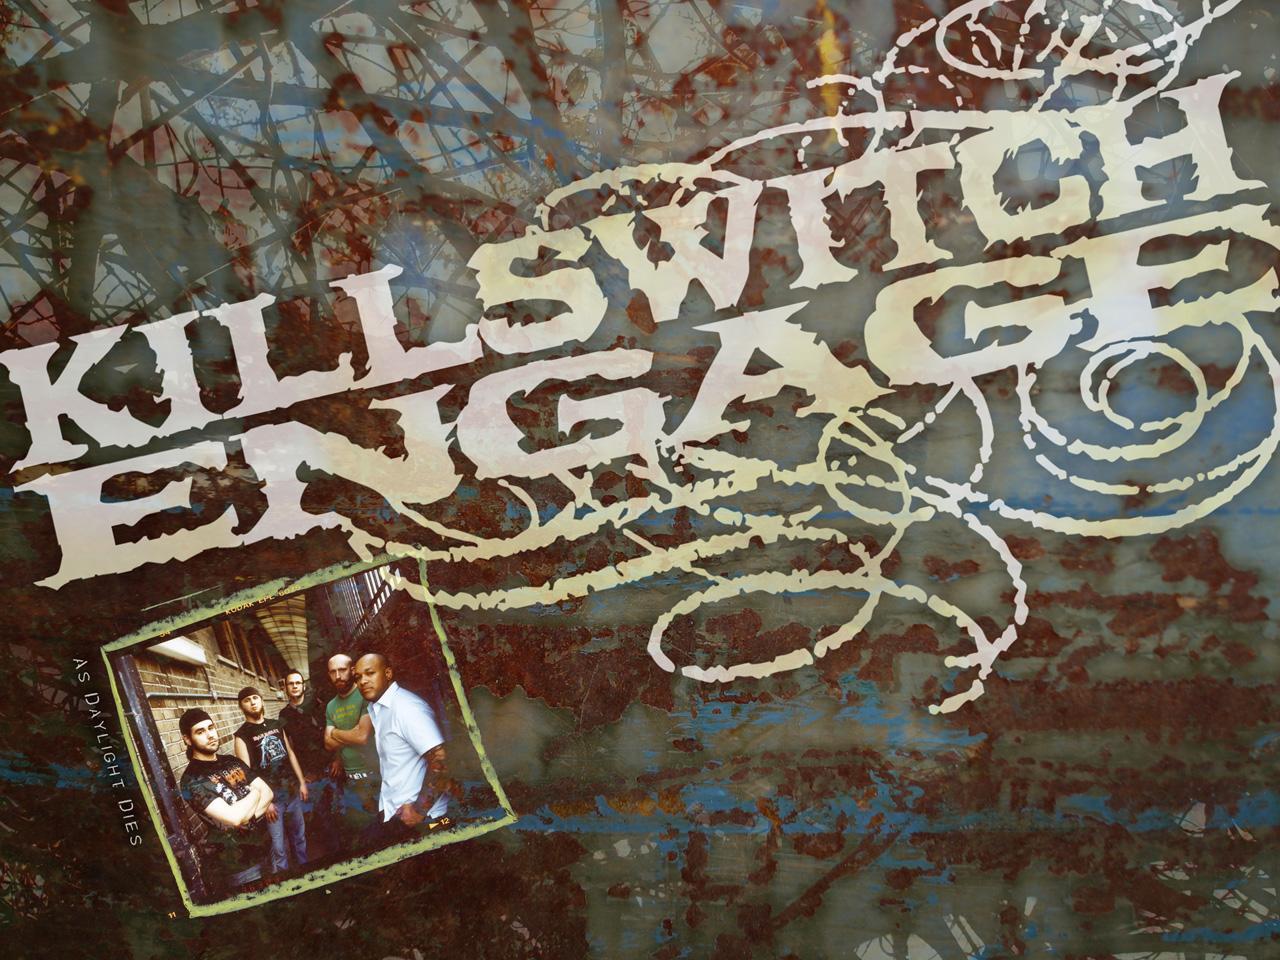 Killswitch Engage Wallpapers Hd Pictures 17 Download